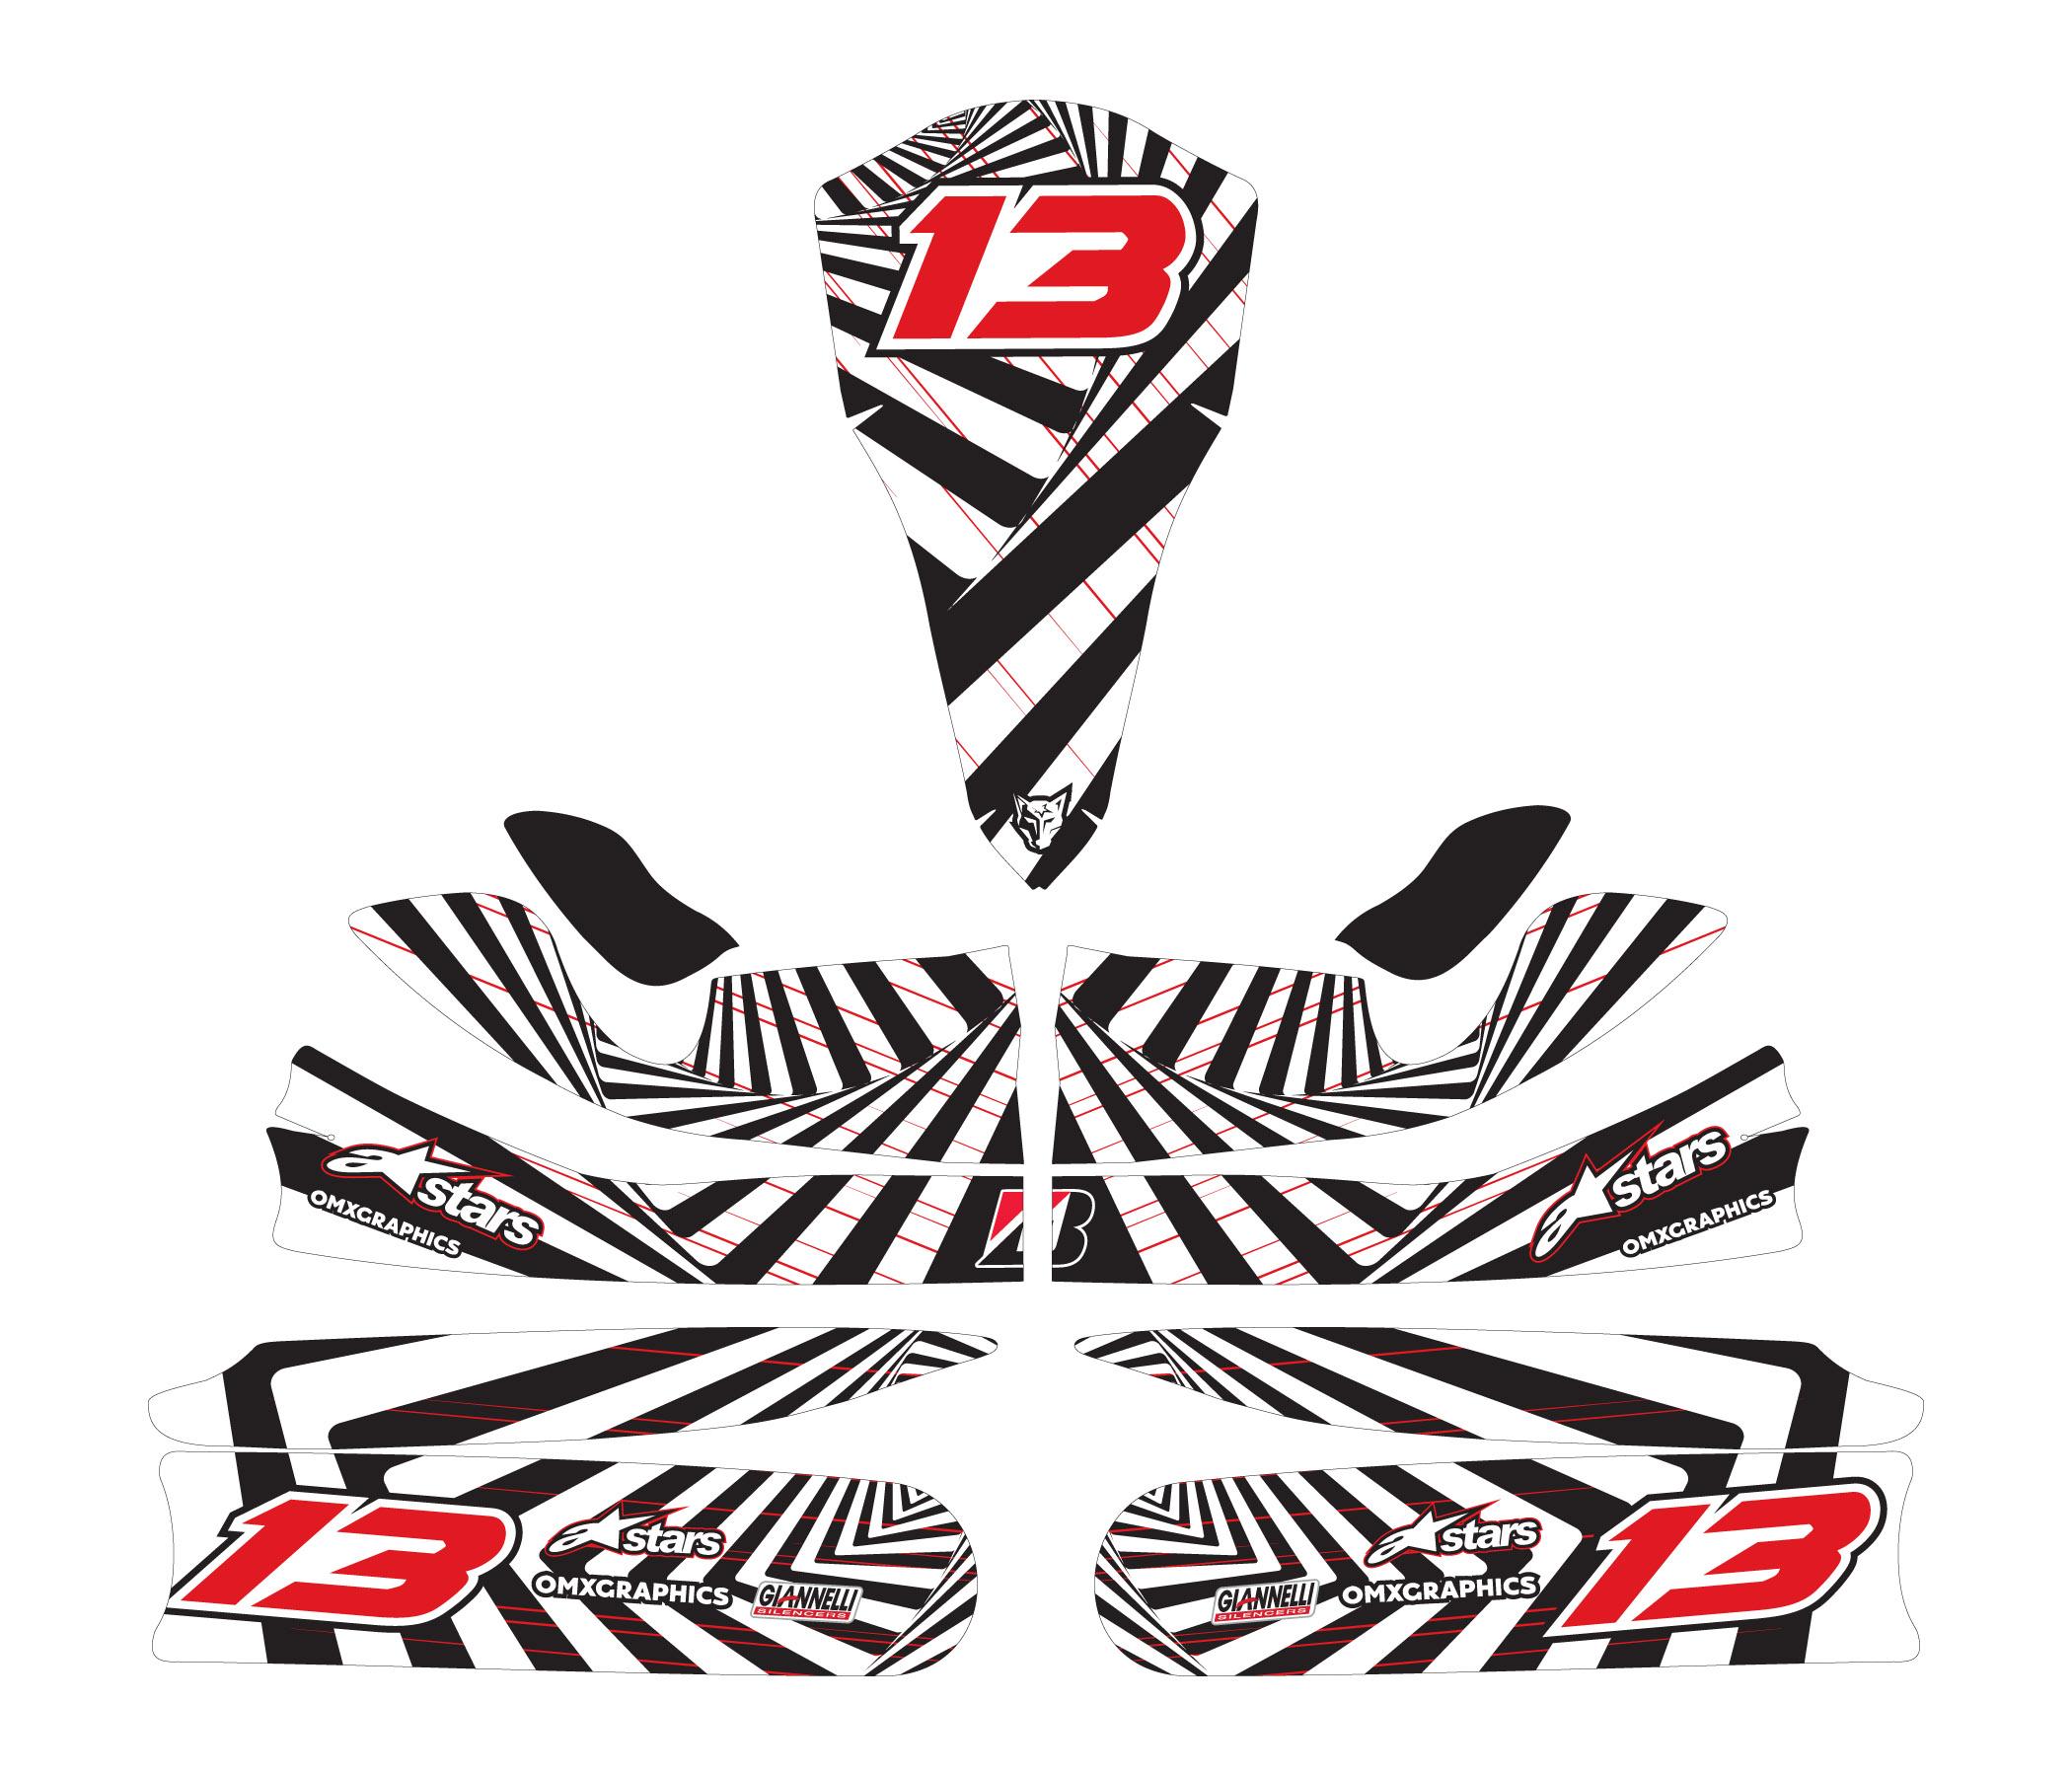 TRIBAL RED CHAIN GUARD STICKER KIT TO MATCH OUR FULL KART KIT JakeDesigns 